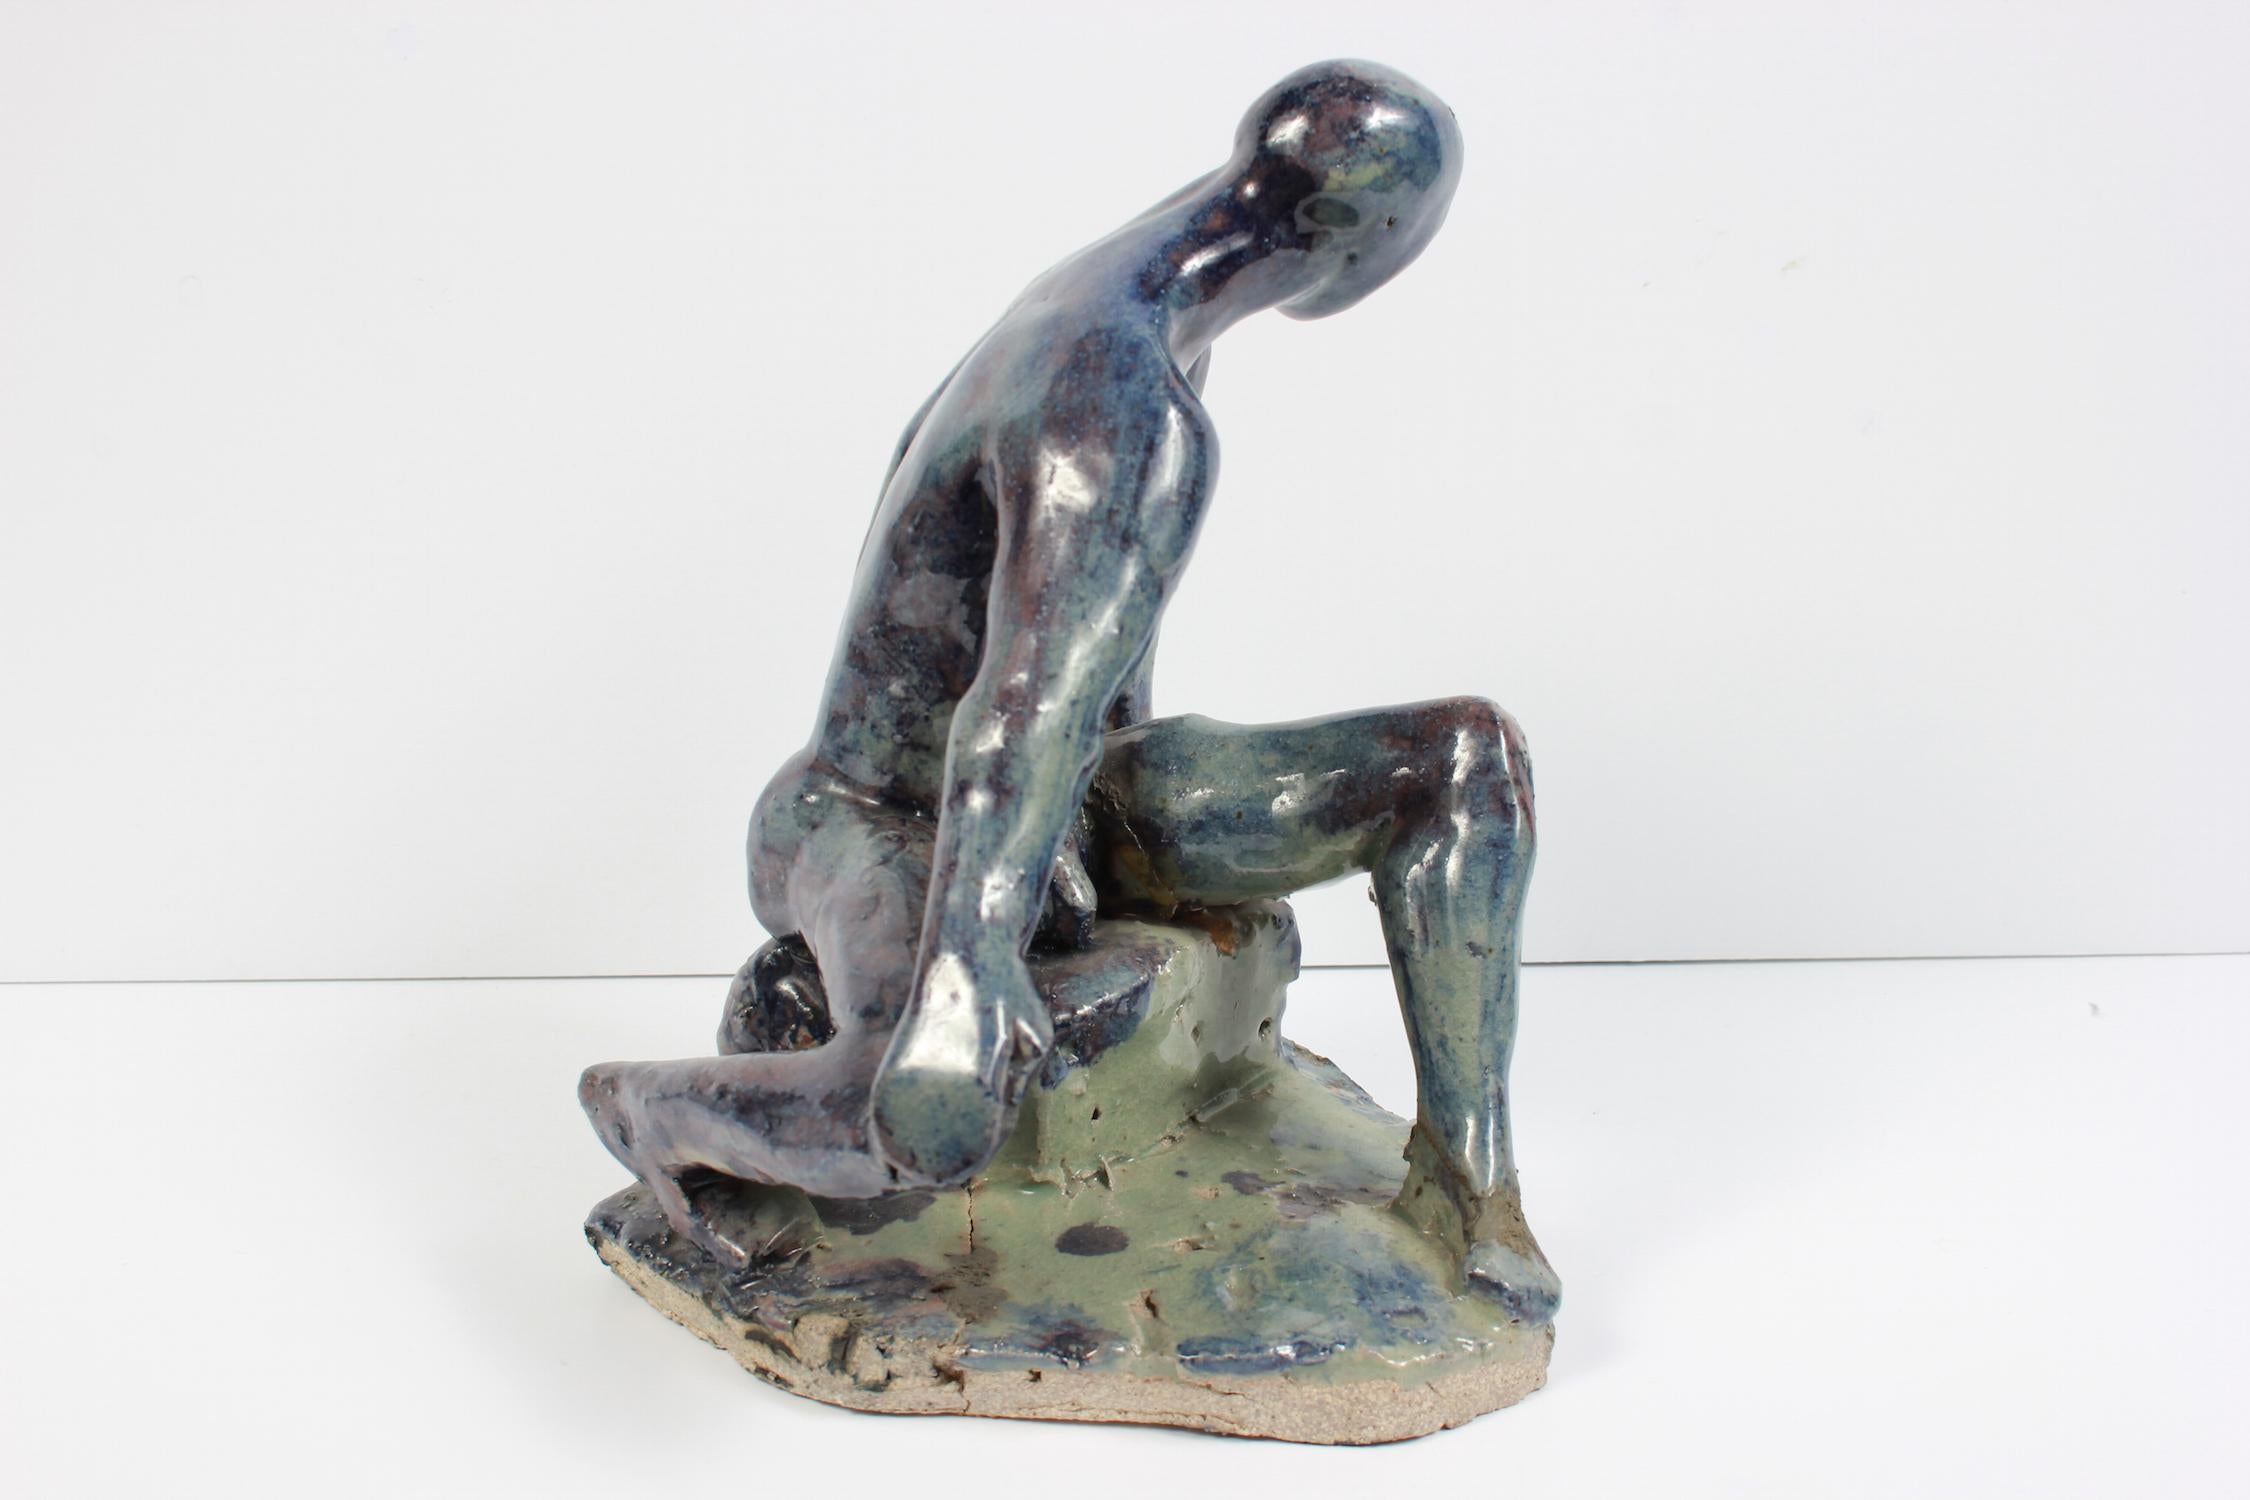 This early 21st century glazed ceramic figurative sculpture of a male nude with blue, moss green, purple, gray, and brown is by Viennese-Southern Californian artist Dave Fox (1920-2011). Fox received his BFA, MA and MFA from California State